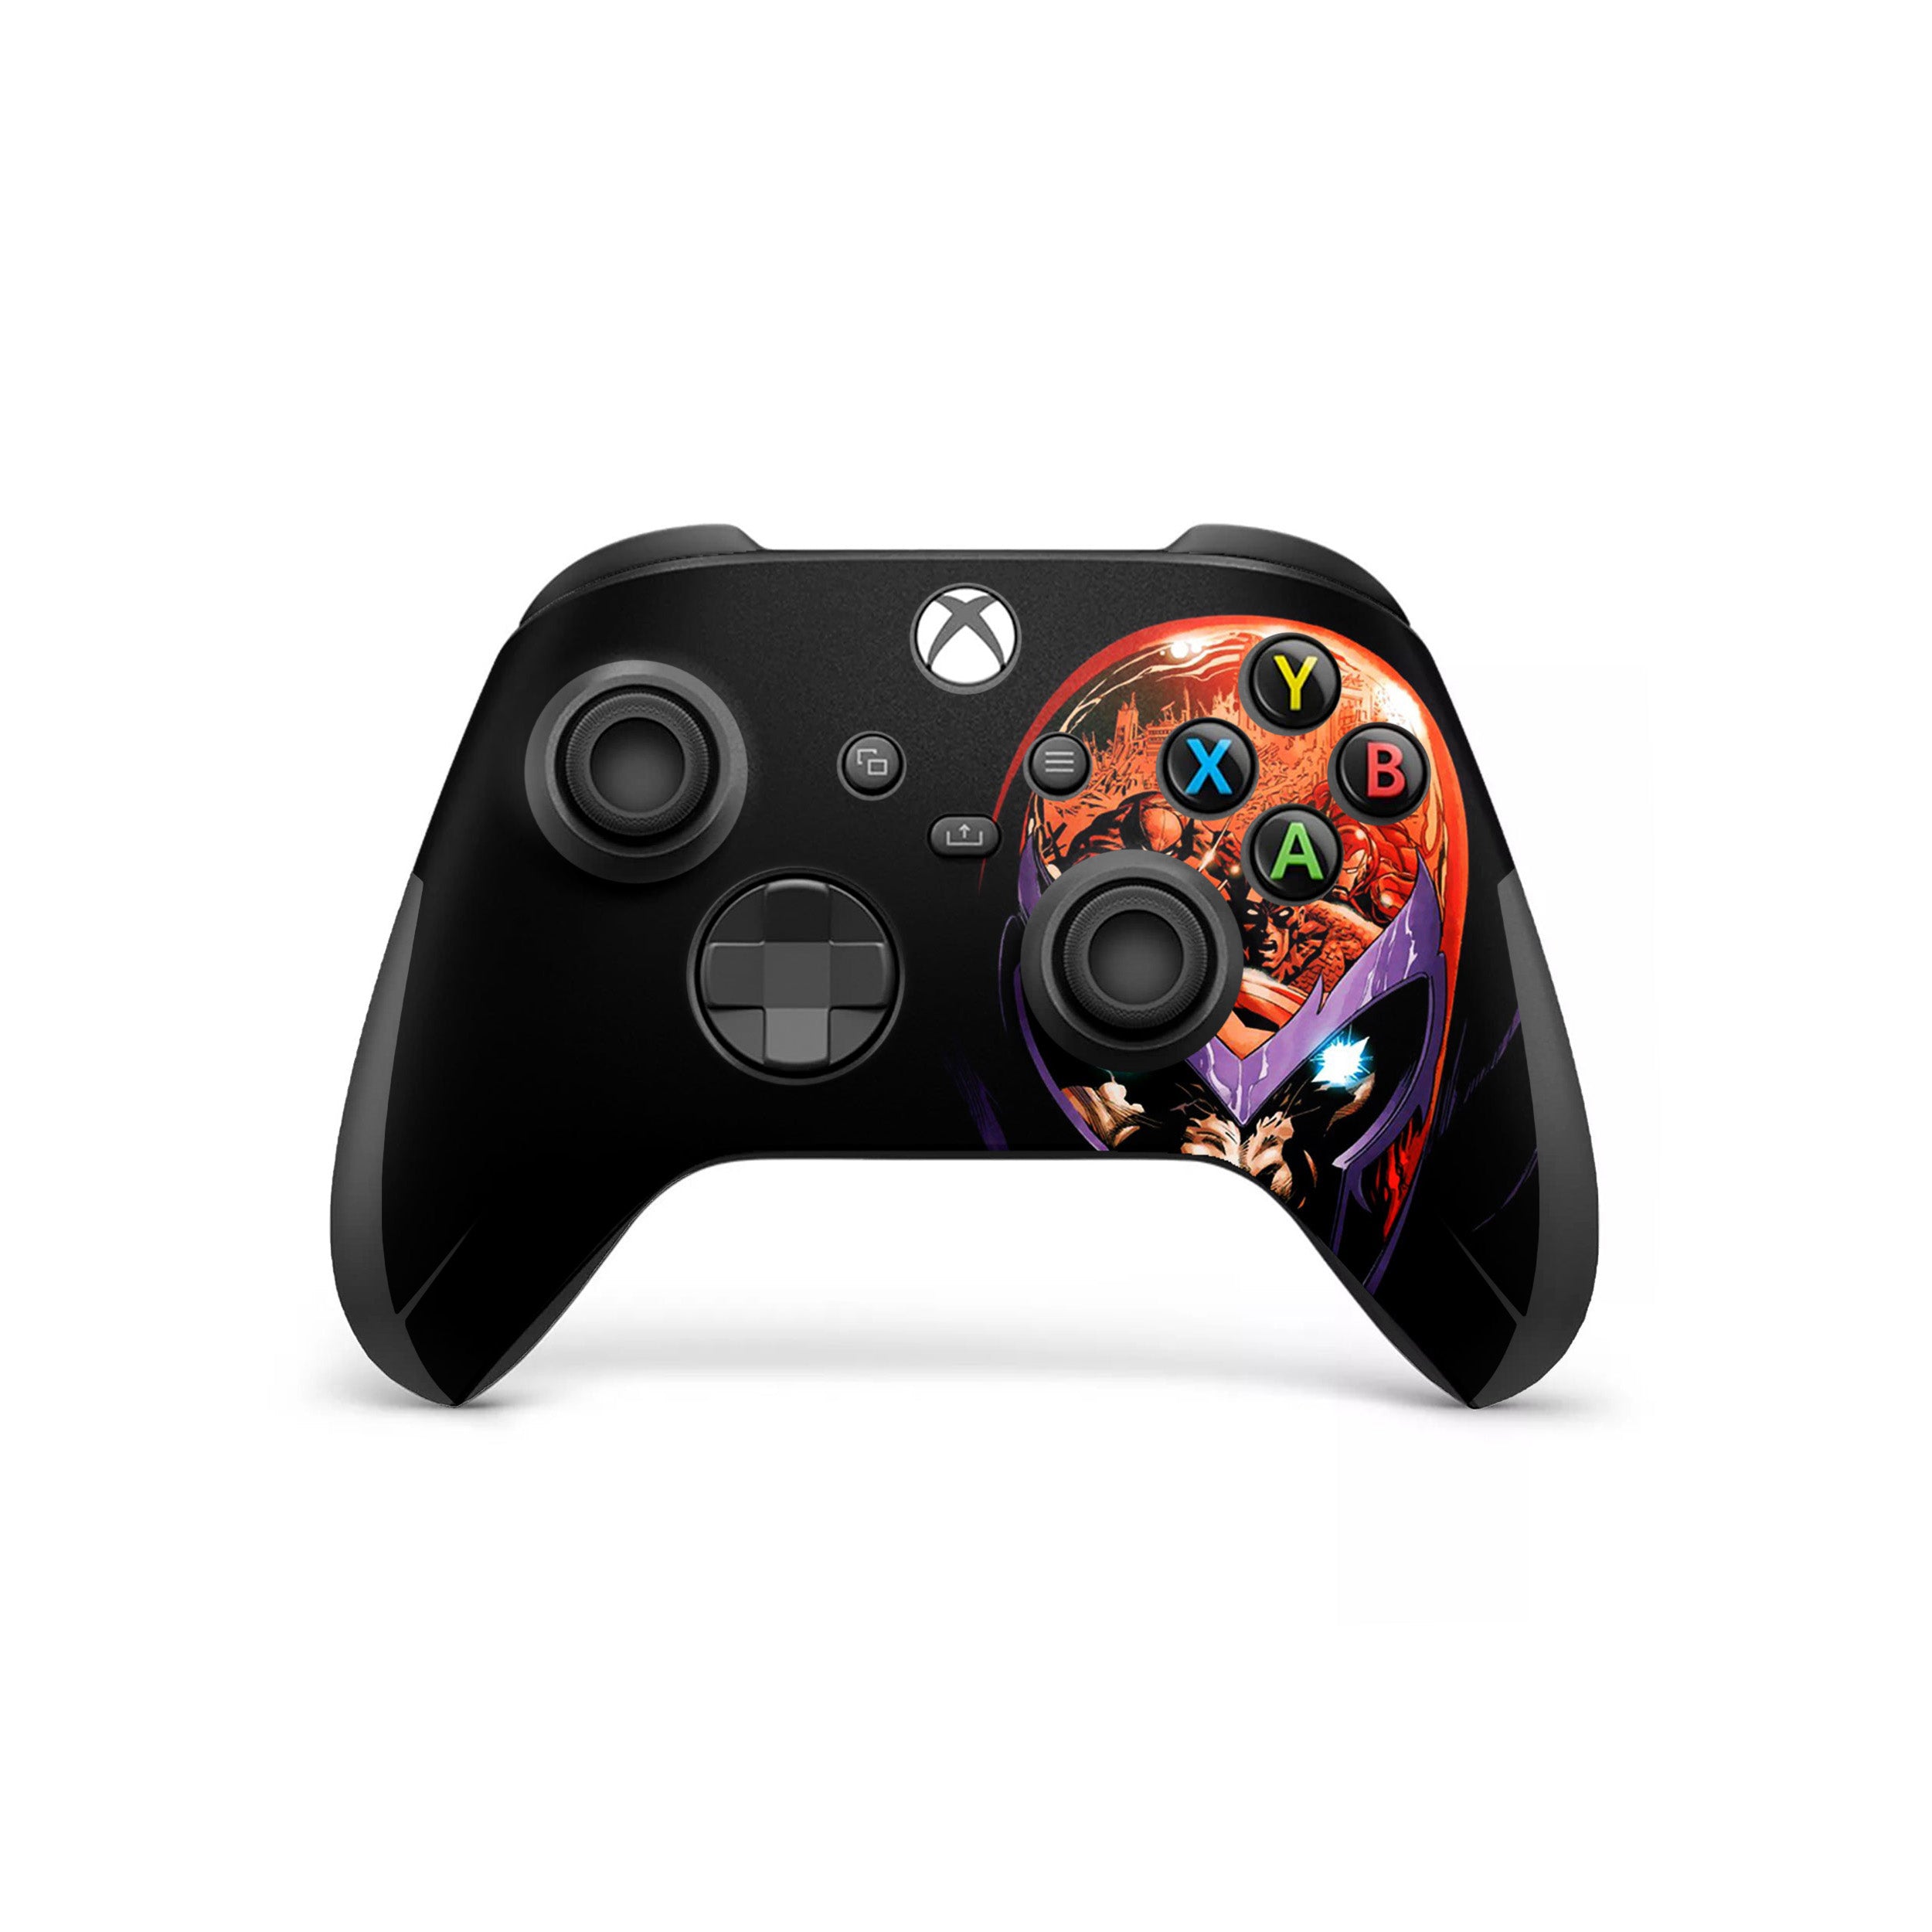 A video game skin featuring a Marvel X Men Magneto design for the Xbox Wireless Controller.